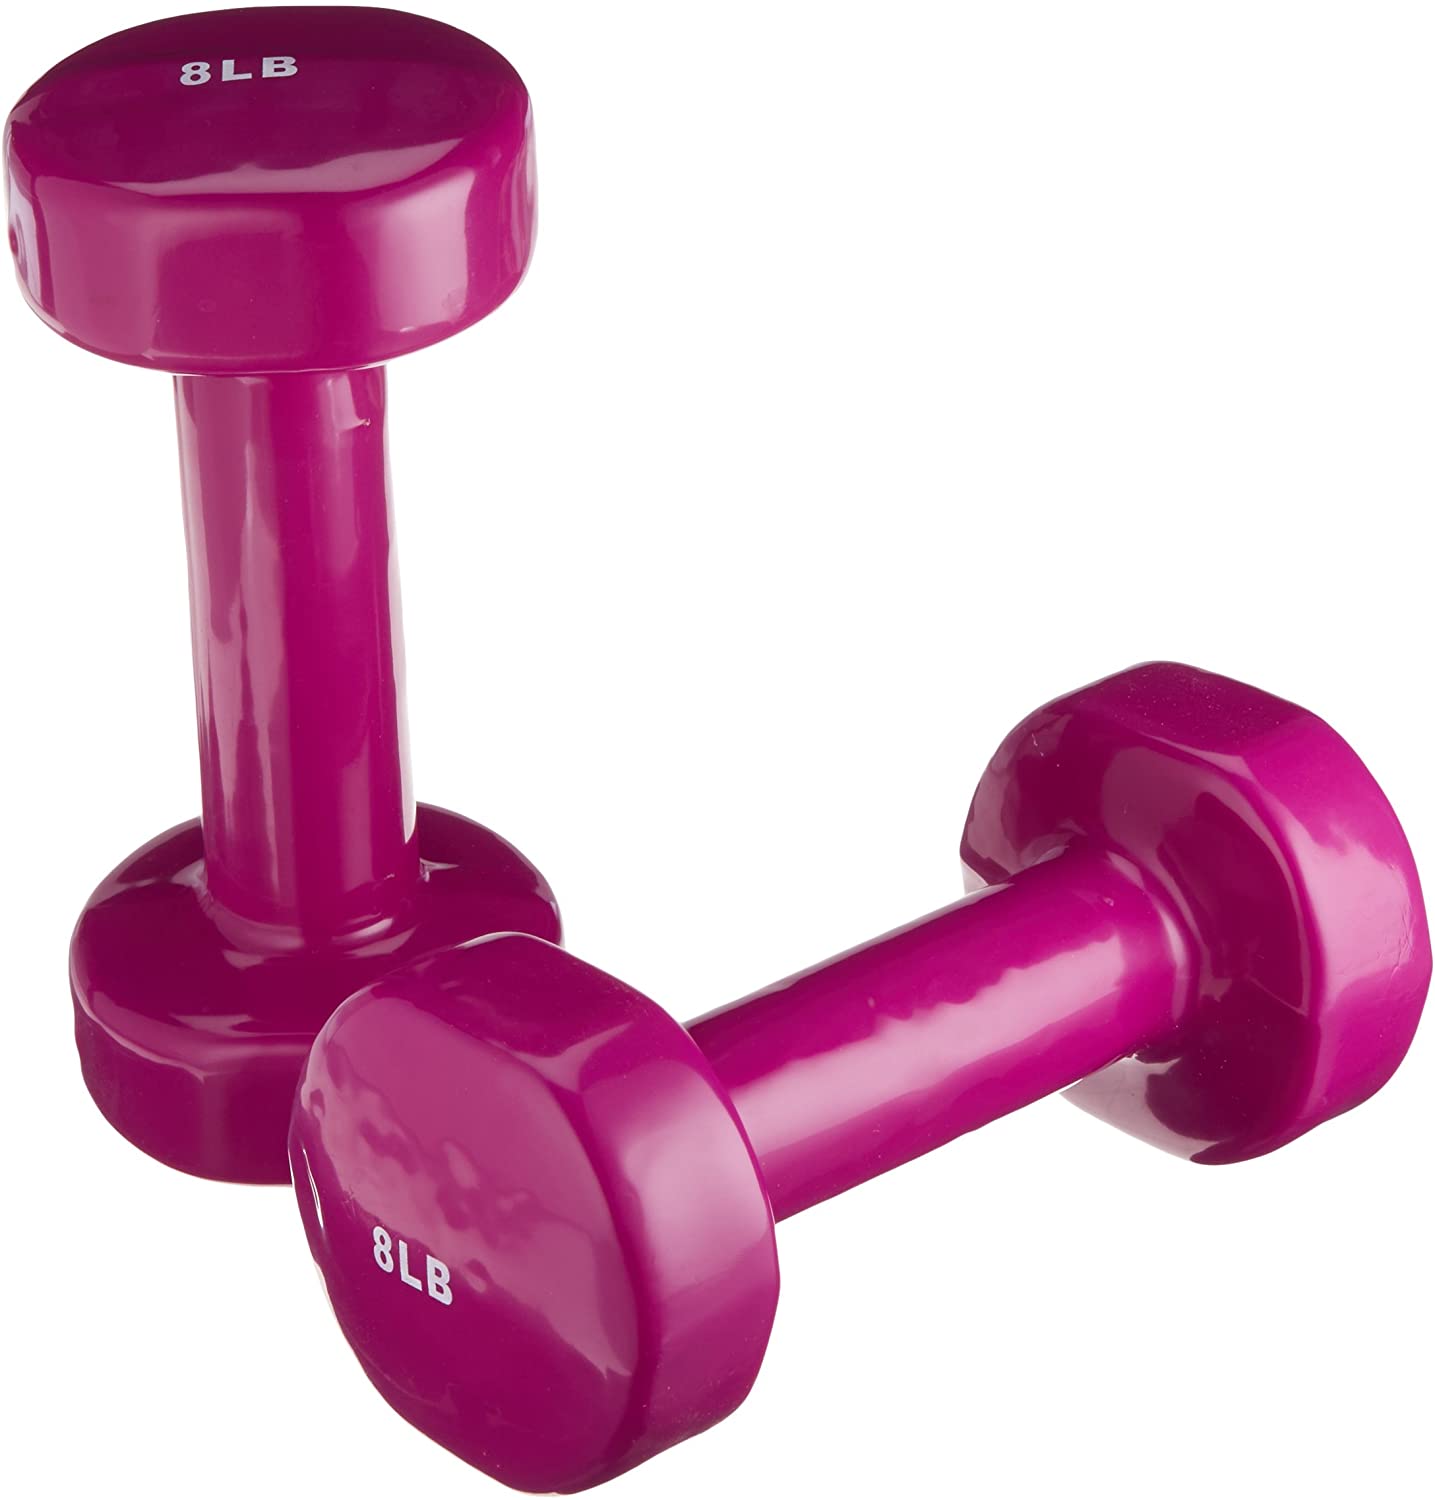 Sammons Preston Vinyl-Coated Iron Dumbbells, 10-Pound, Pair, Soft Easy-Grip Dumbbell Weights for Strength Training, Muscle Toning, Body Rehabiliaiton, and Physical Therapy, Home, Gym, and Clinical Use